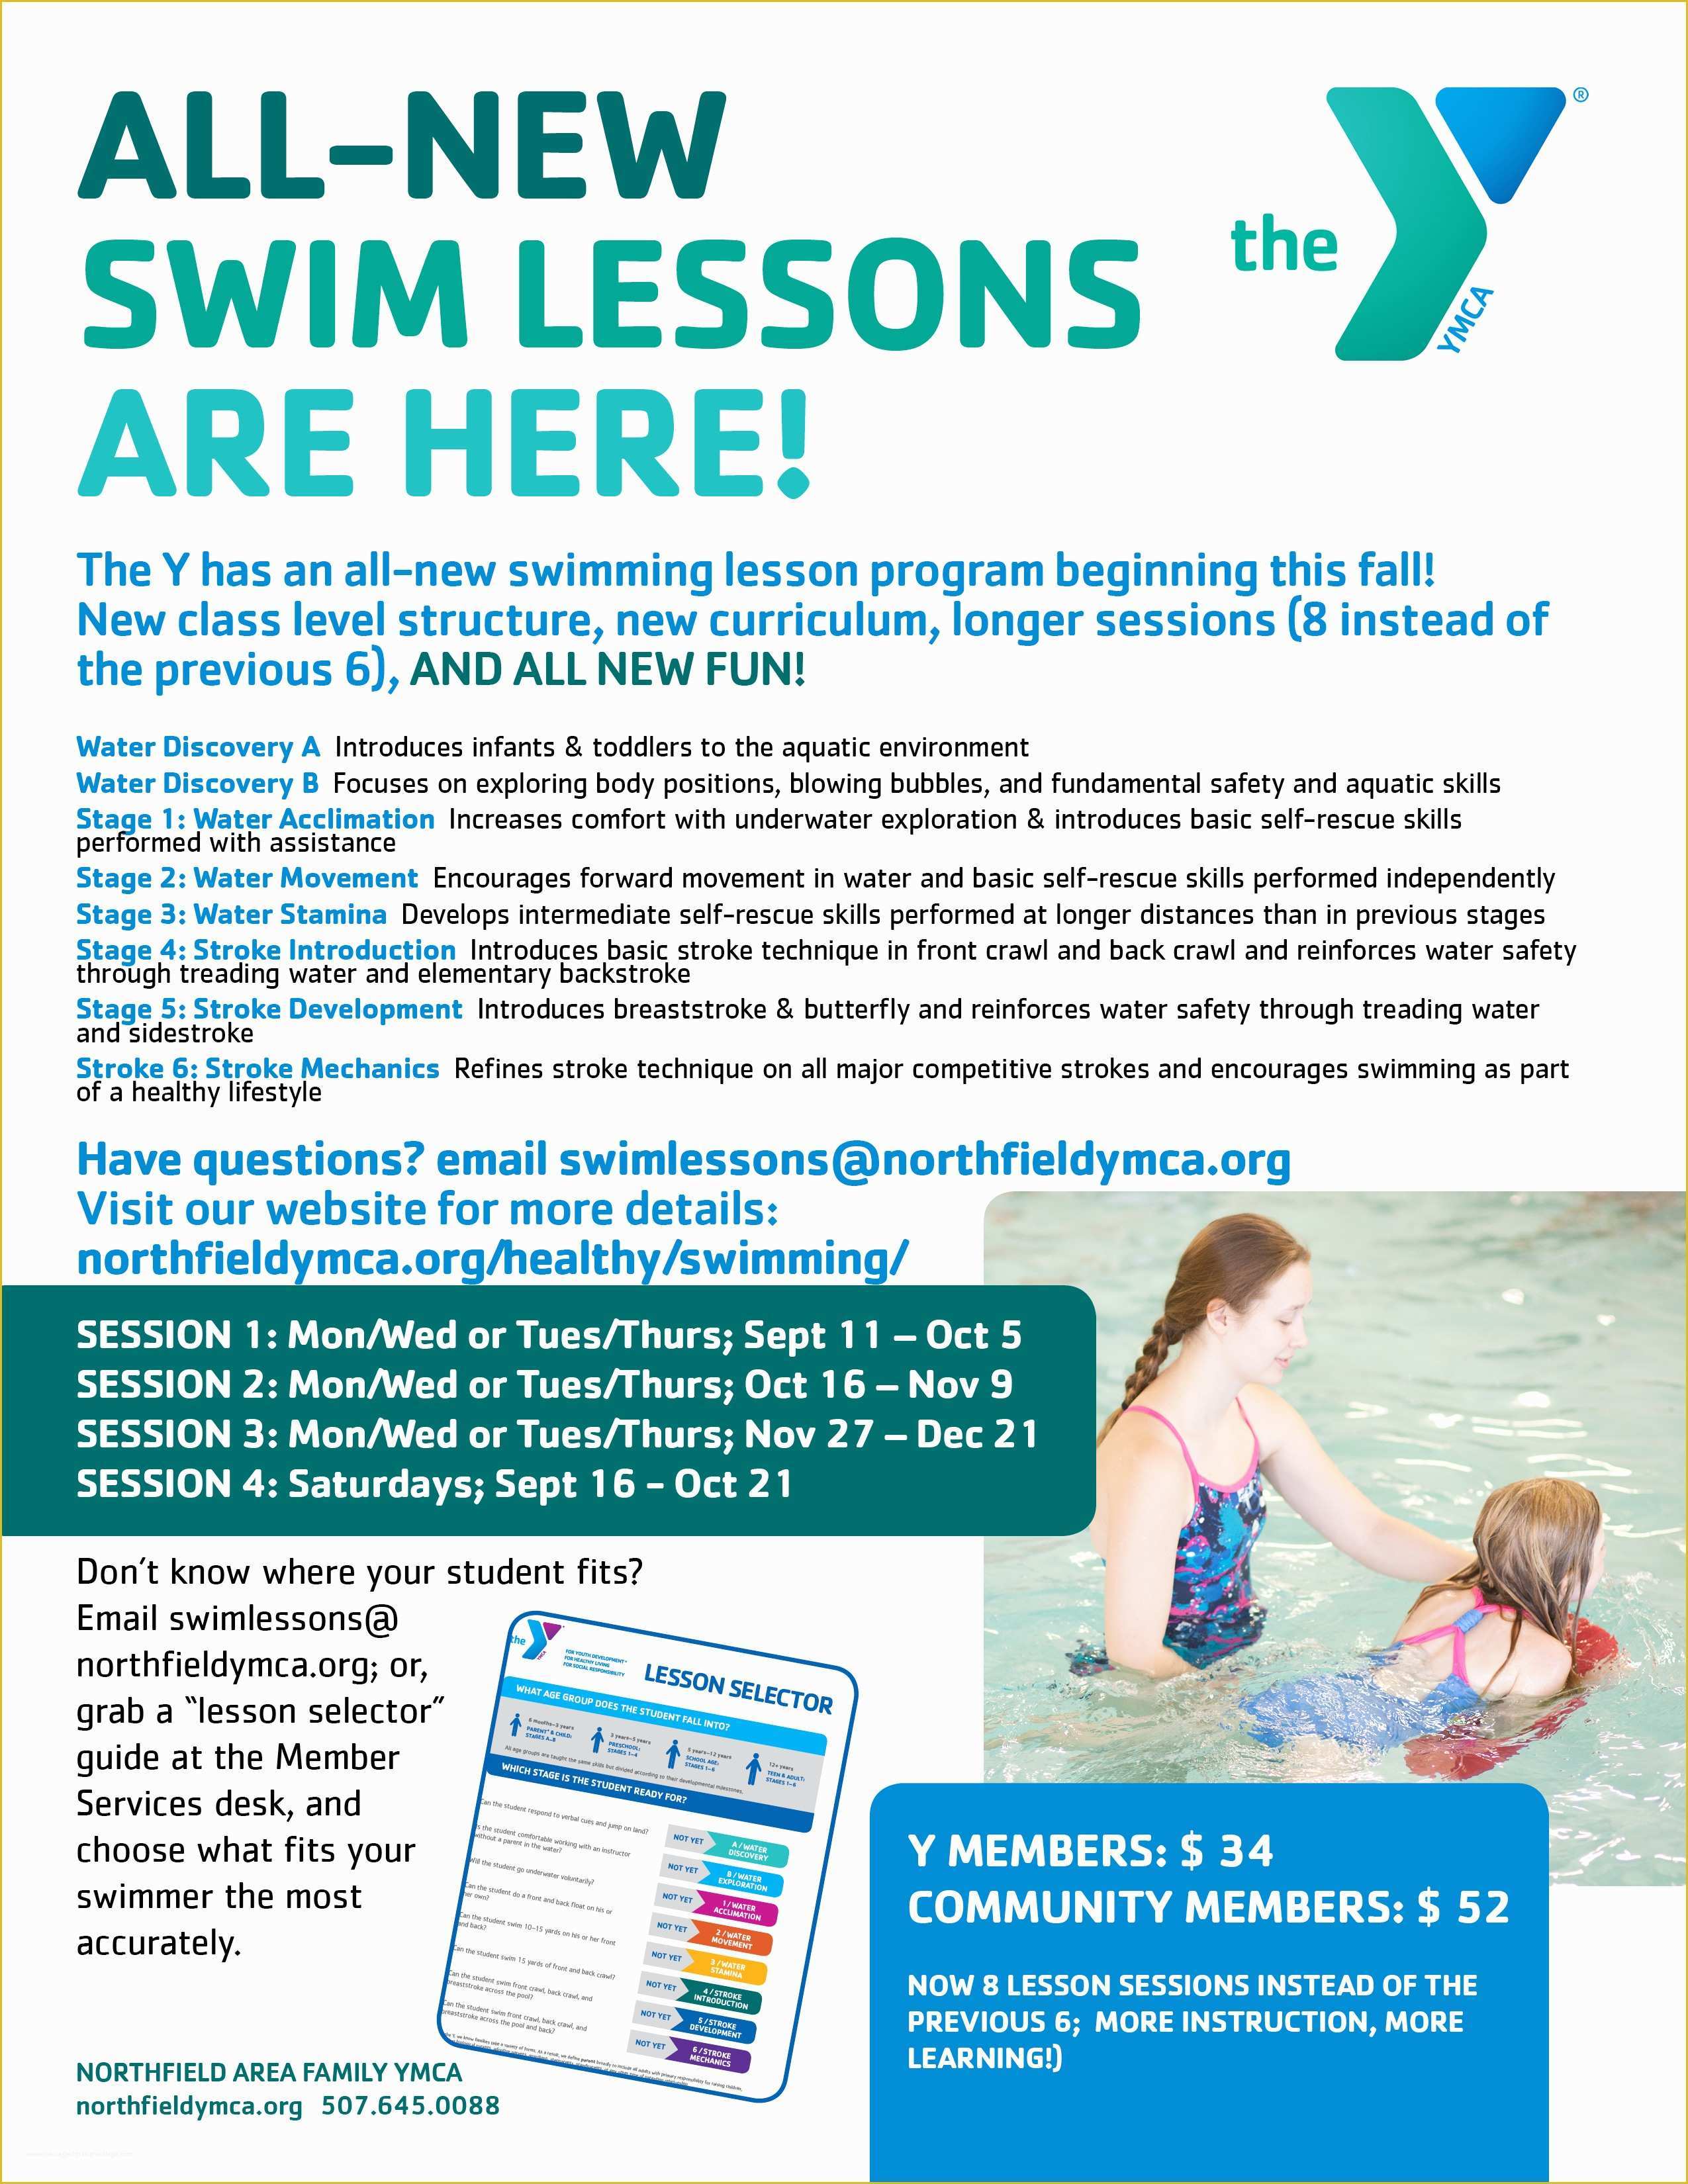 Swim Lesson Flyer Template Free Of All New Swimming Lessons are Here northfield area